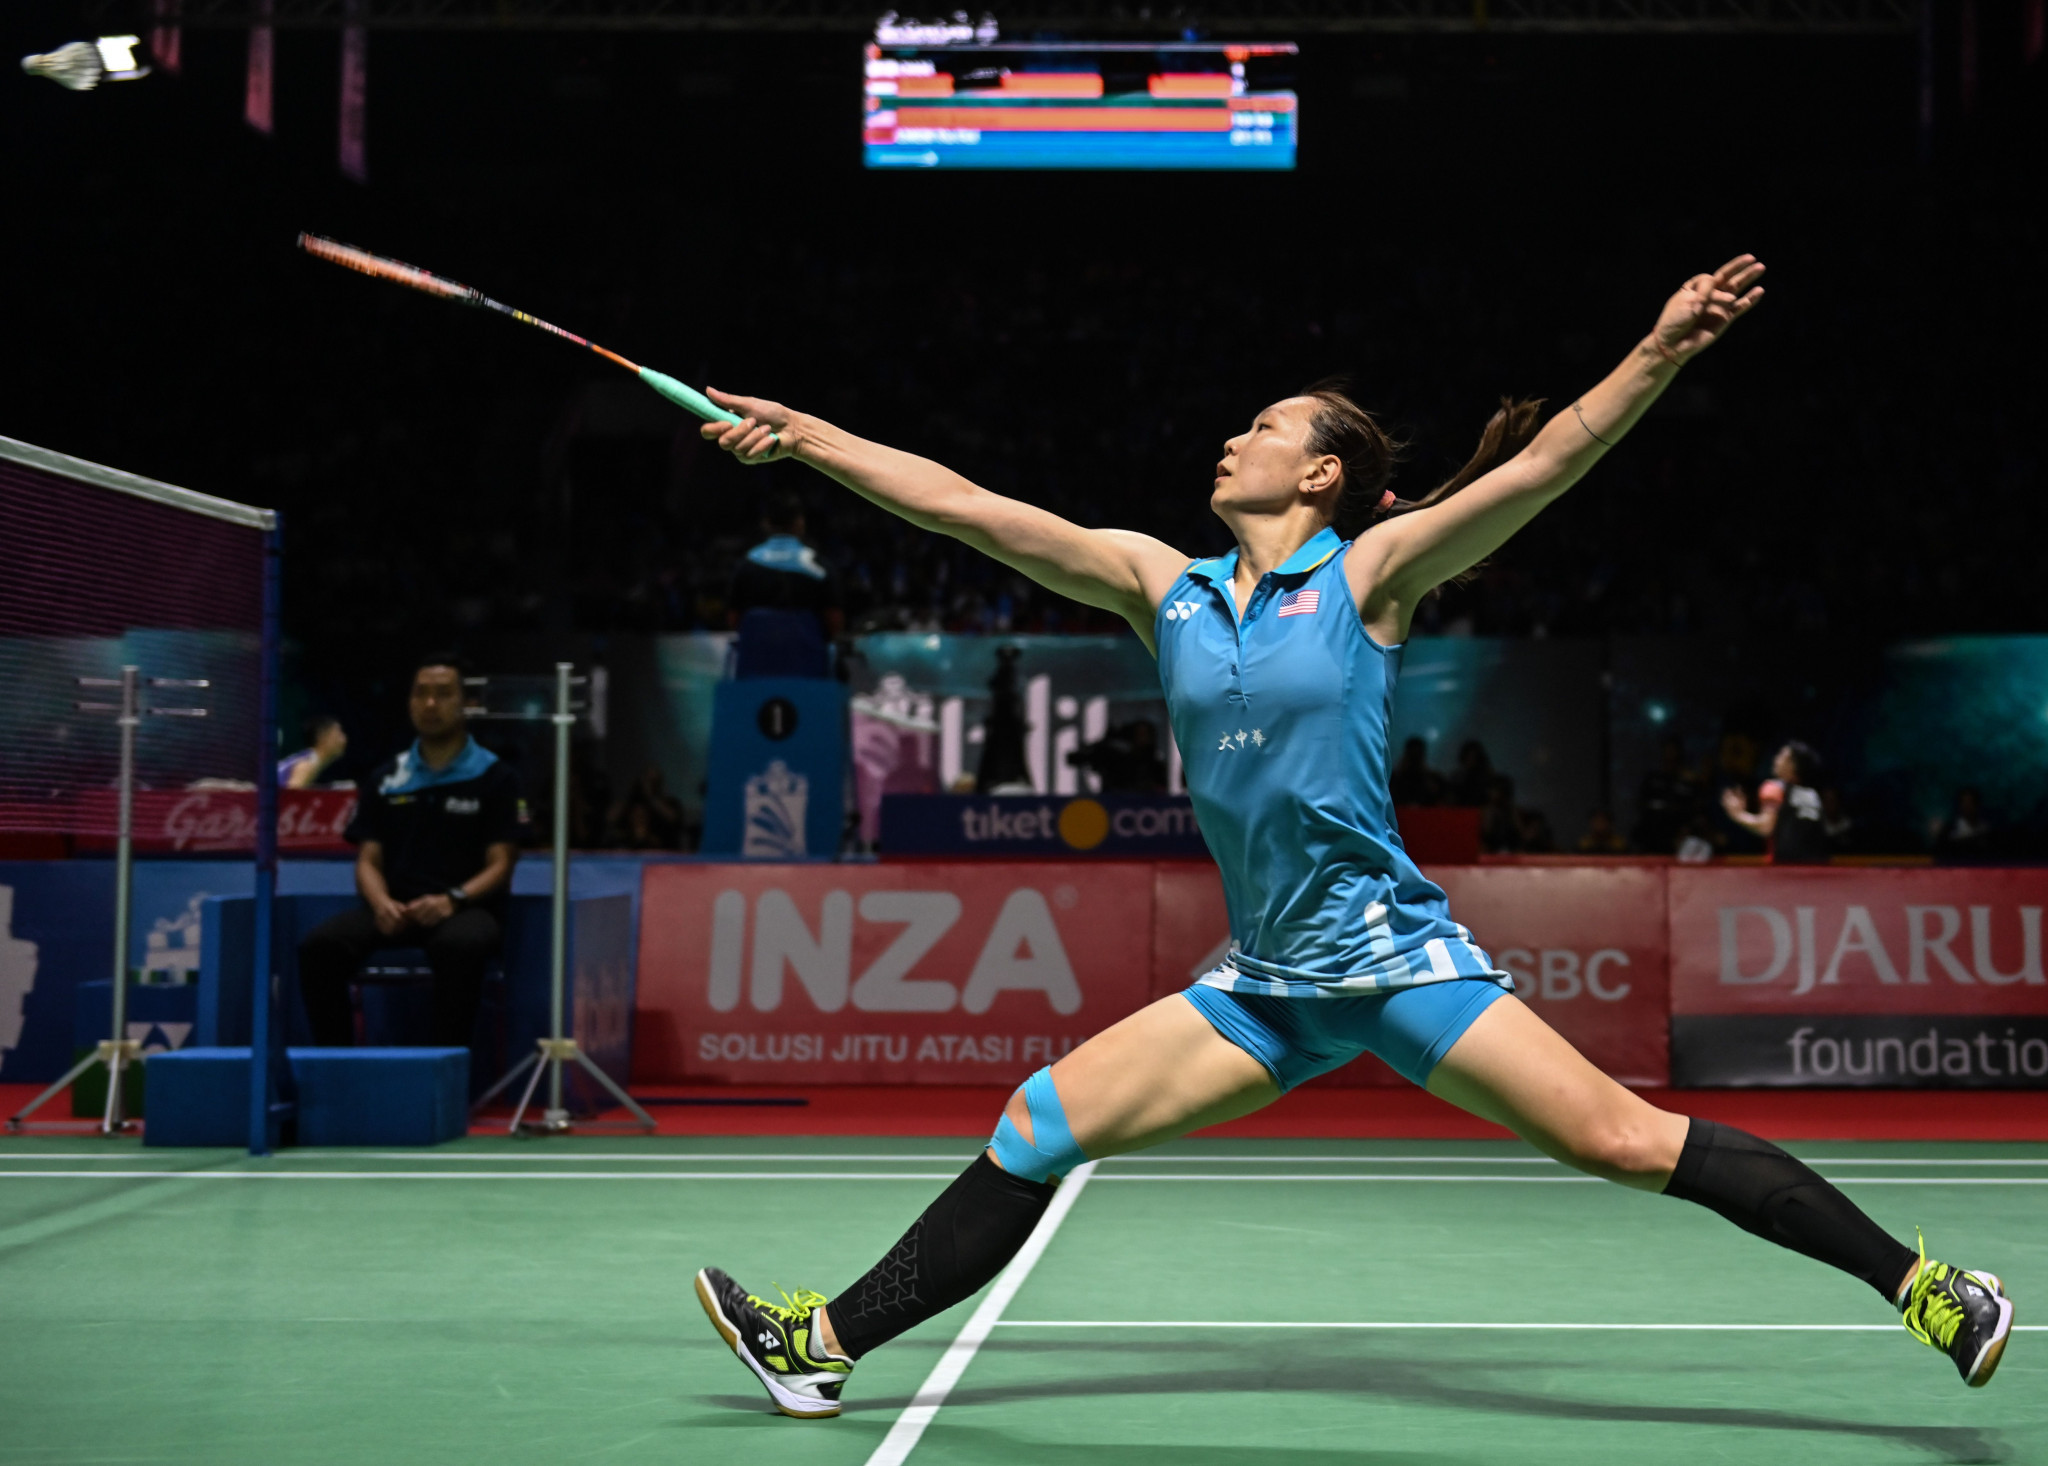 Beiwen Zhang of the United States knocked out world champion PV Sindhu ©Getty Images